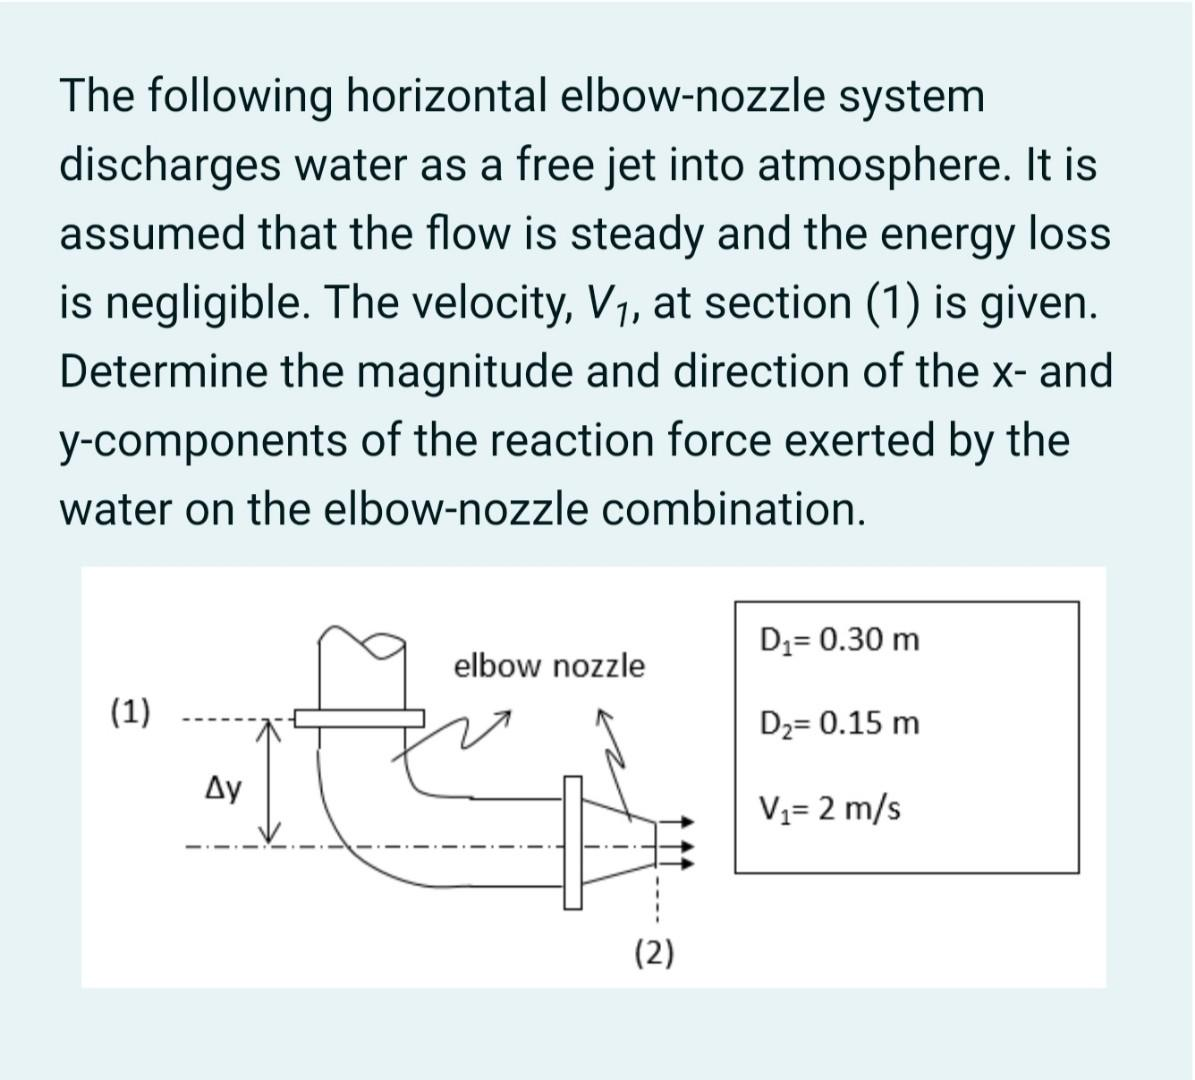 The following horizontal elbow-nozzle system
discharges water as a free jet into atmosphere. It is
assumed that the flow is steady and the energy loss
is negligible. The velocity, V₁, at section (1) is given.
Determine the magnitude and direction of the x- and
y-components of the reaction force exerted by the
water on the elbow-nozzle combination.
(1)
ΔΥ
elbow nozzle
(2)
D₁= 0.30 m
D₂= 0.15 m
V₁= 2 m/s